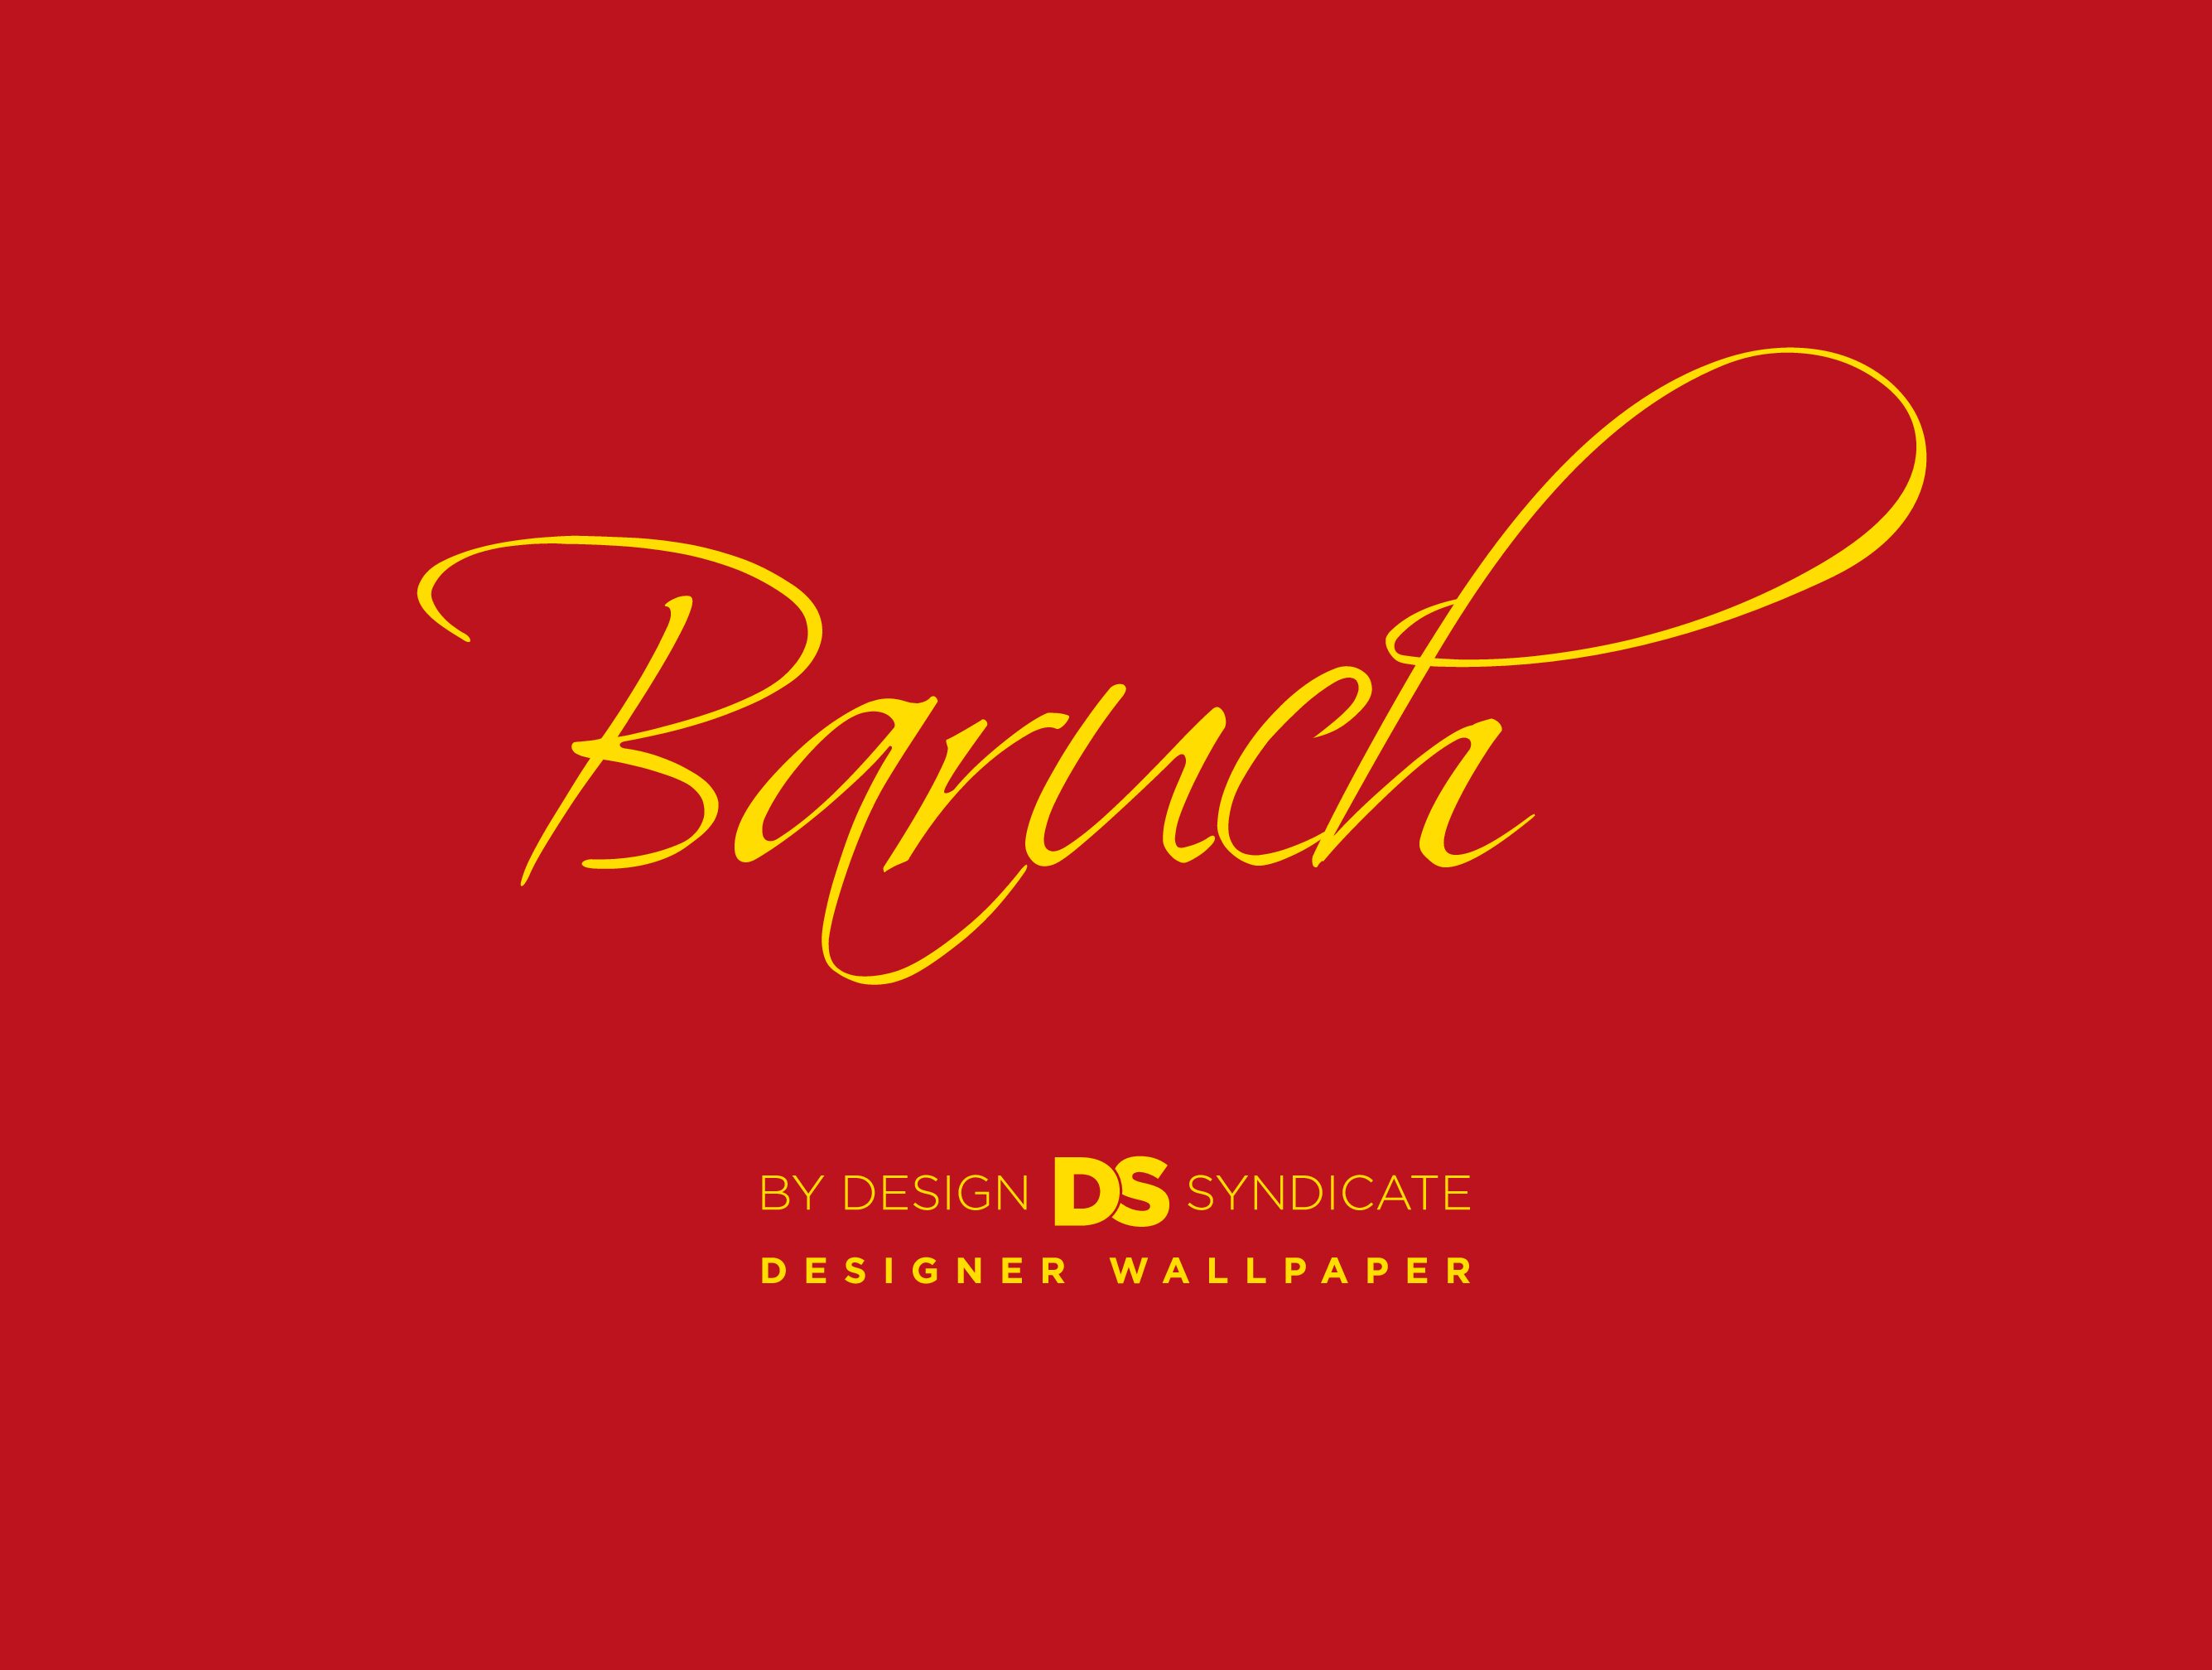 Design Syndicate-Baruch Catalogue